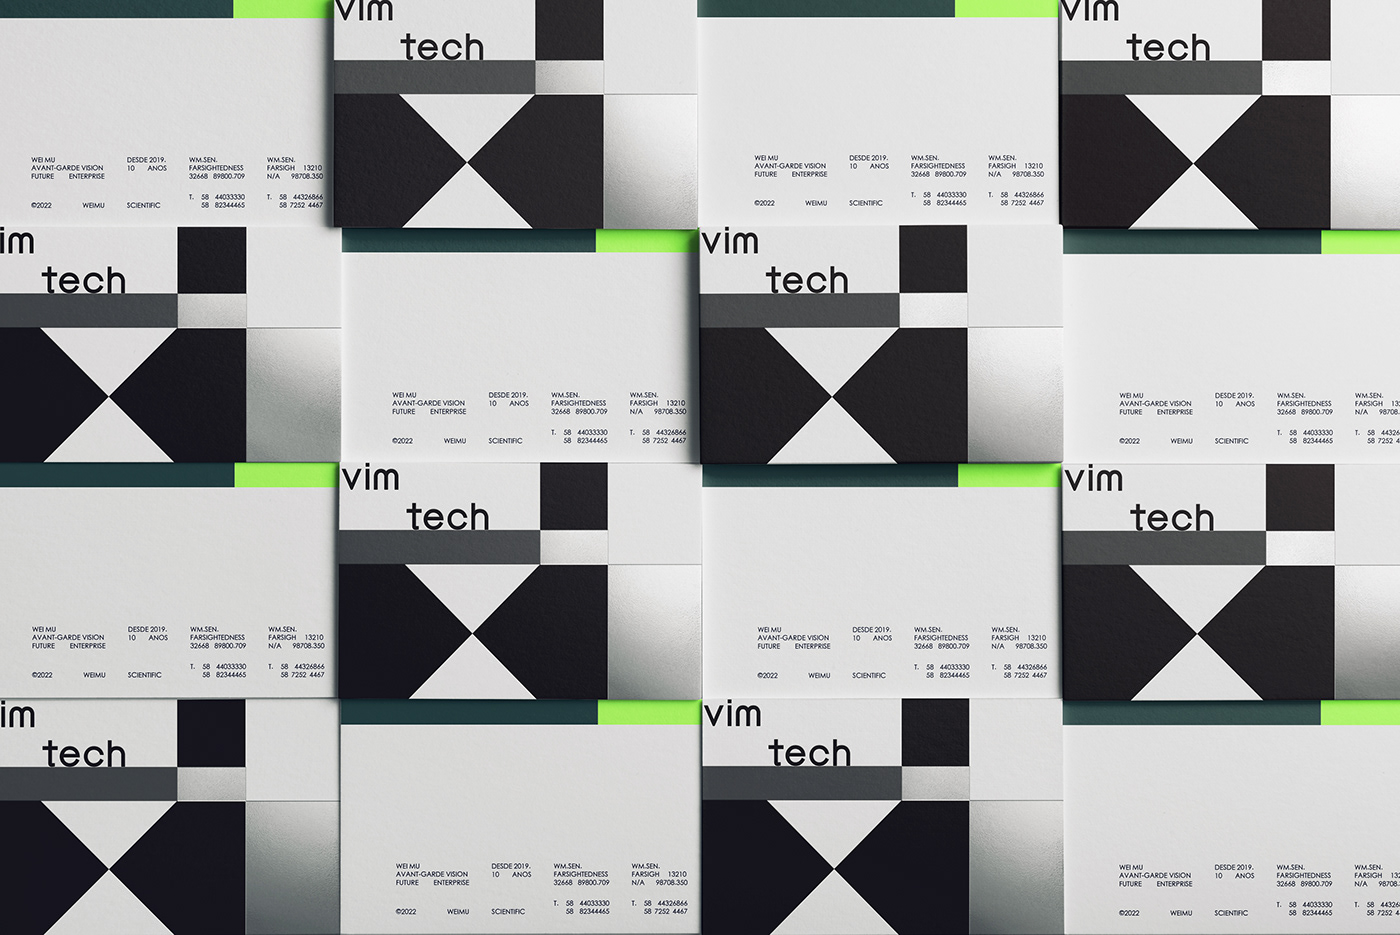 Artifact from the Vim Tech's Unique Branding and Visual Identity article on Abduzeedo